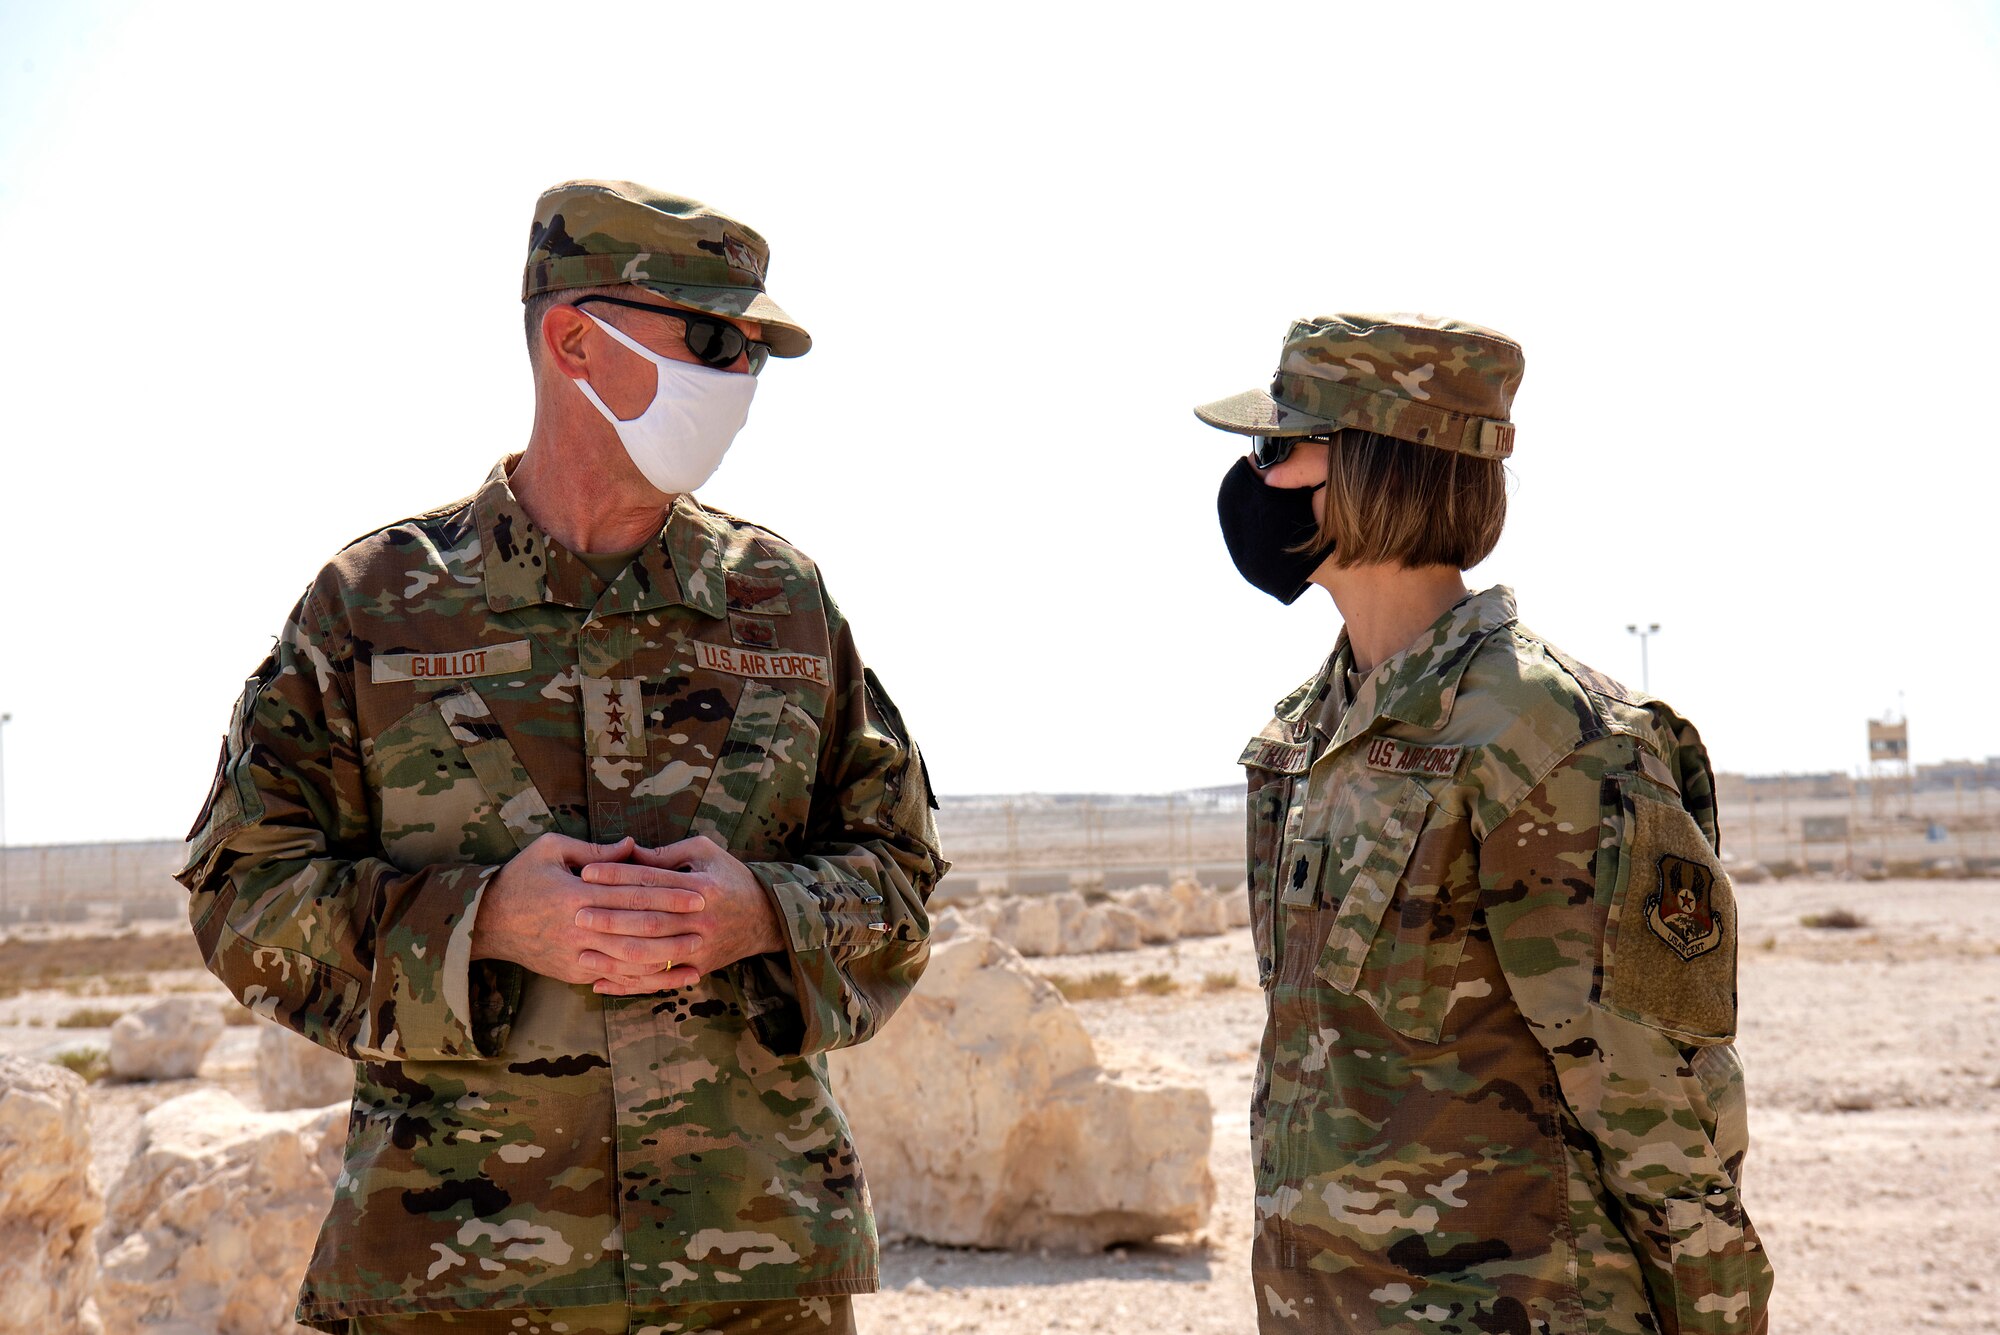 U.S. Air Force Lt. Gen. Greg Guillot, U.S. Air Forces Central commander, speaks with Lt. Col. Renee Thoutte, 379th Expeditionary Force Support Squadron commander, during his troop engagement with the 379th Air Expeditionary Wing at Al Udeid Air Base, Qatar, Sept. 28, 2020. During his visit, Guillot interacted with Airmen and recognized outstanding performers in support of the wing and operations across the region.